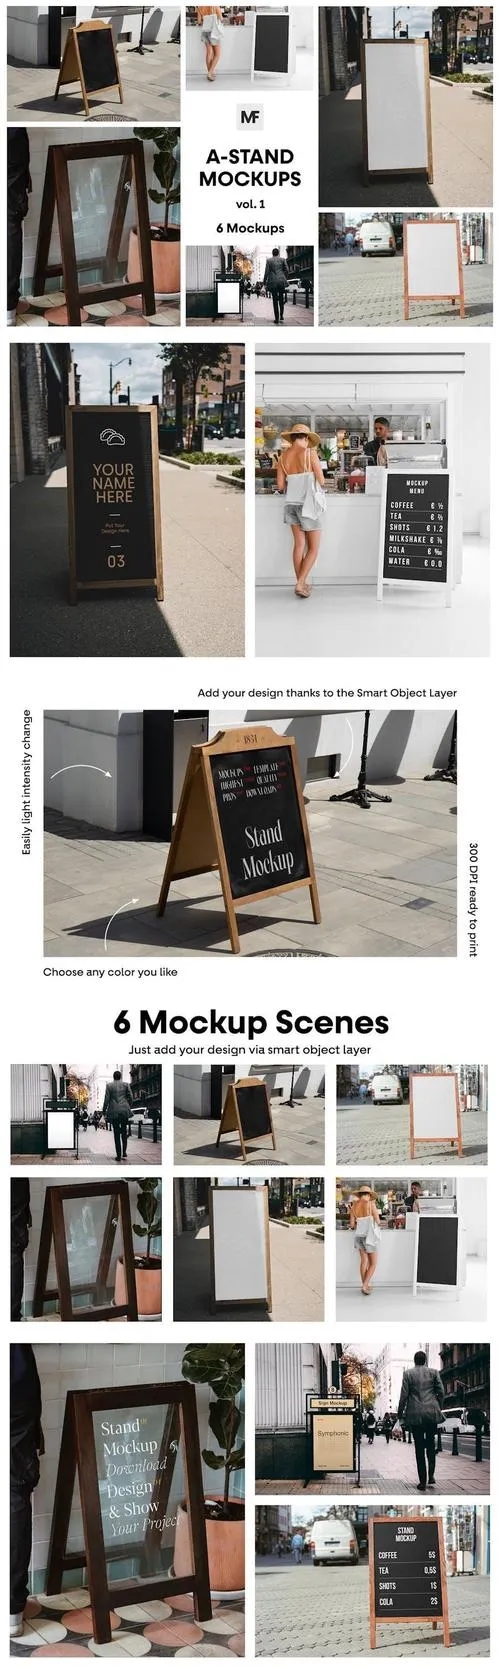 A-Stand Mockups vol.1 - Advertising